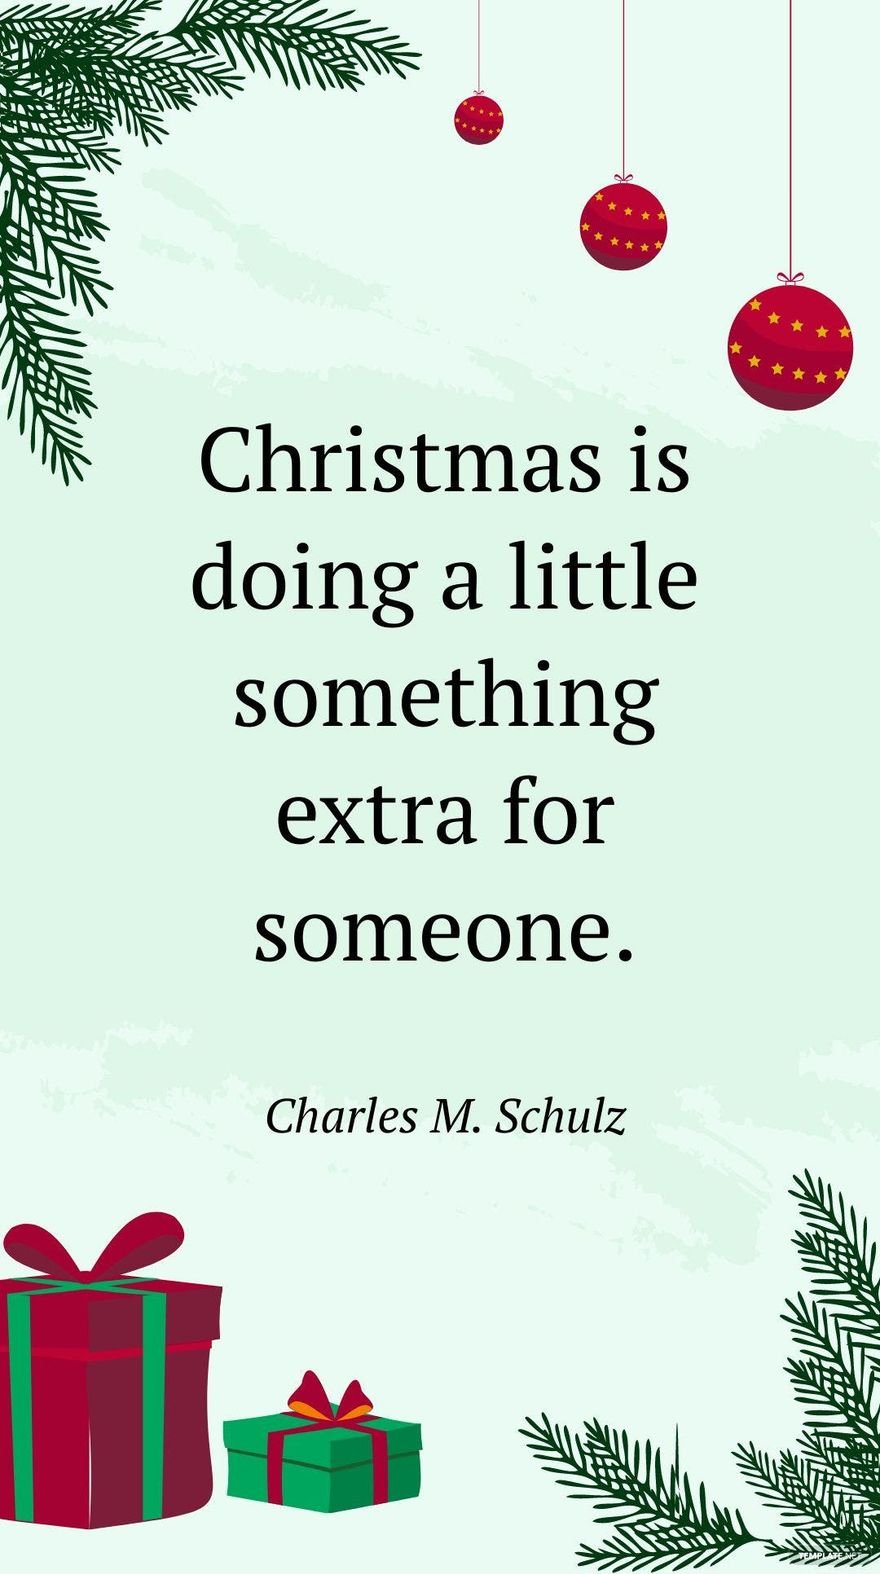 Free Charles M. Schulz - Christmas is doing a little something extra for someone.  in JPG